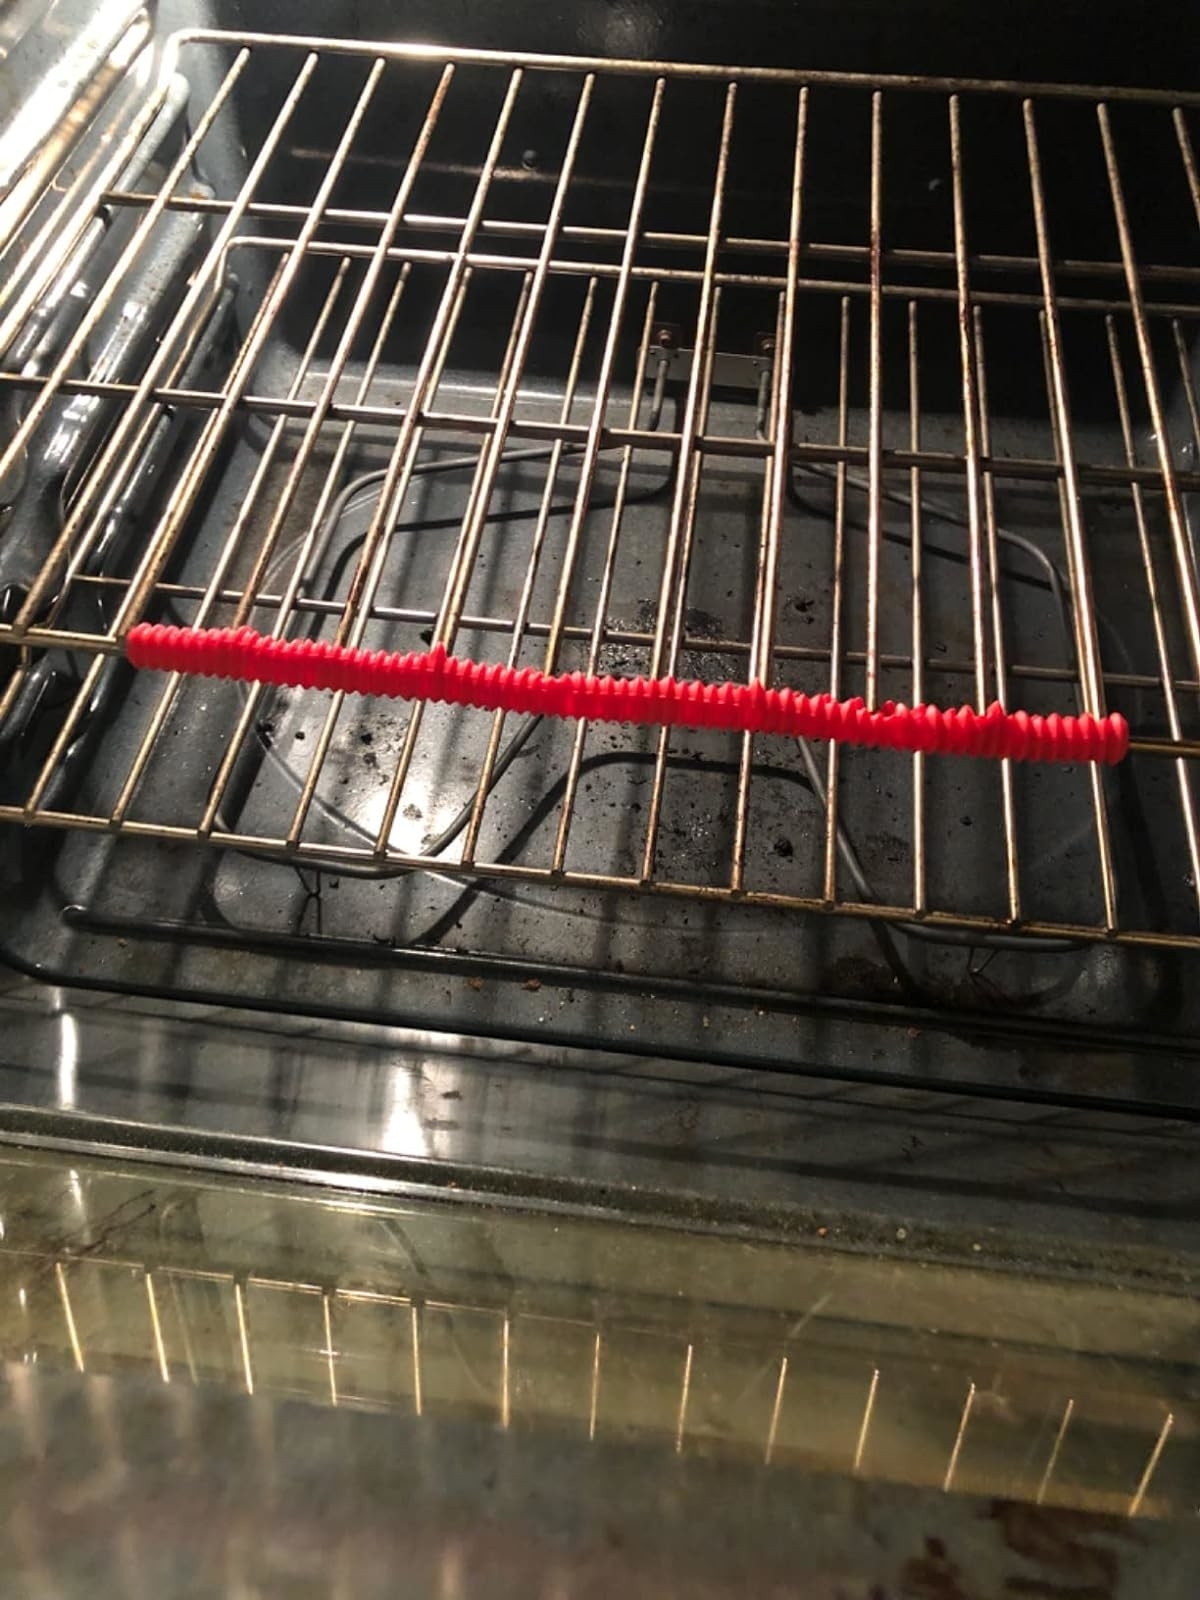 Reviewer image of the red guard on an oven rack